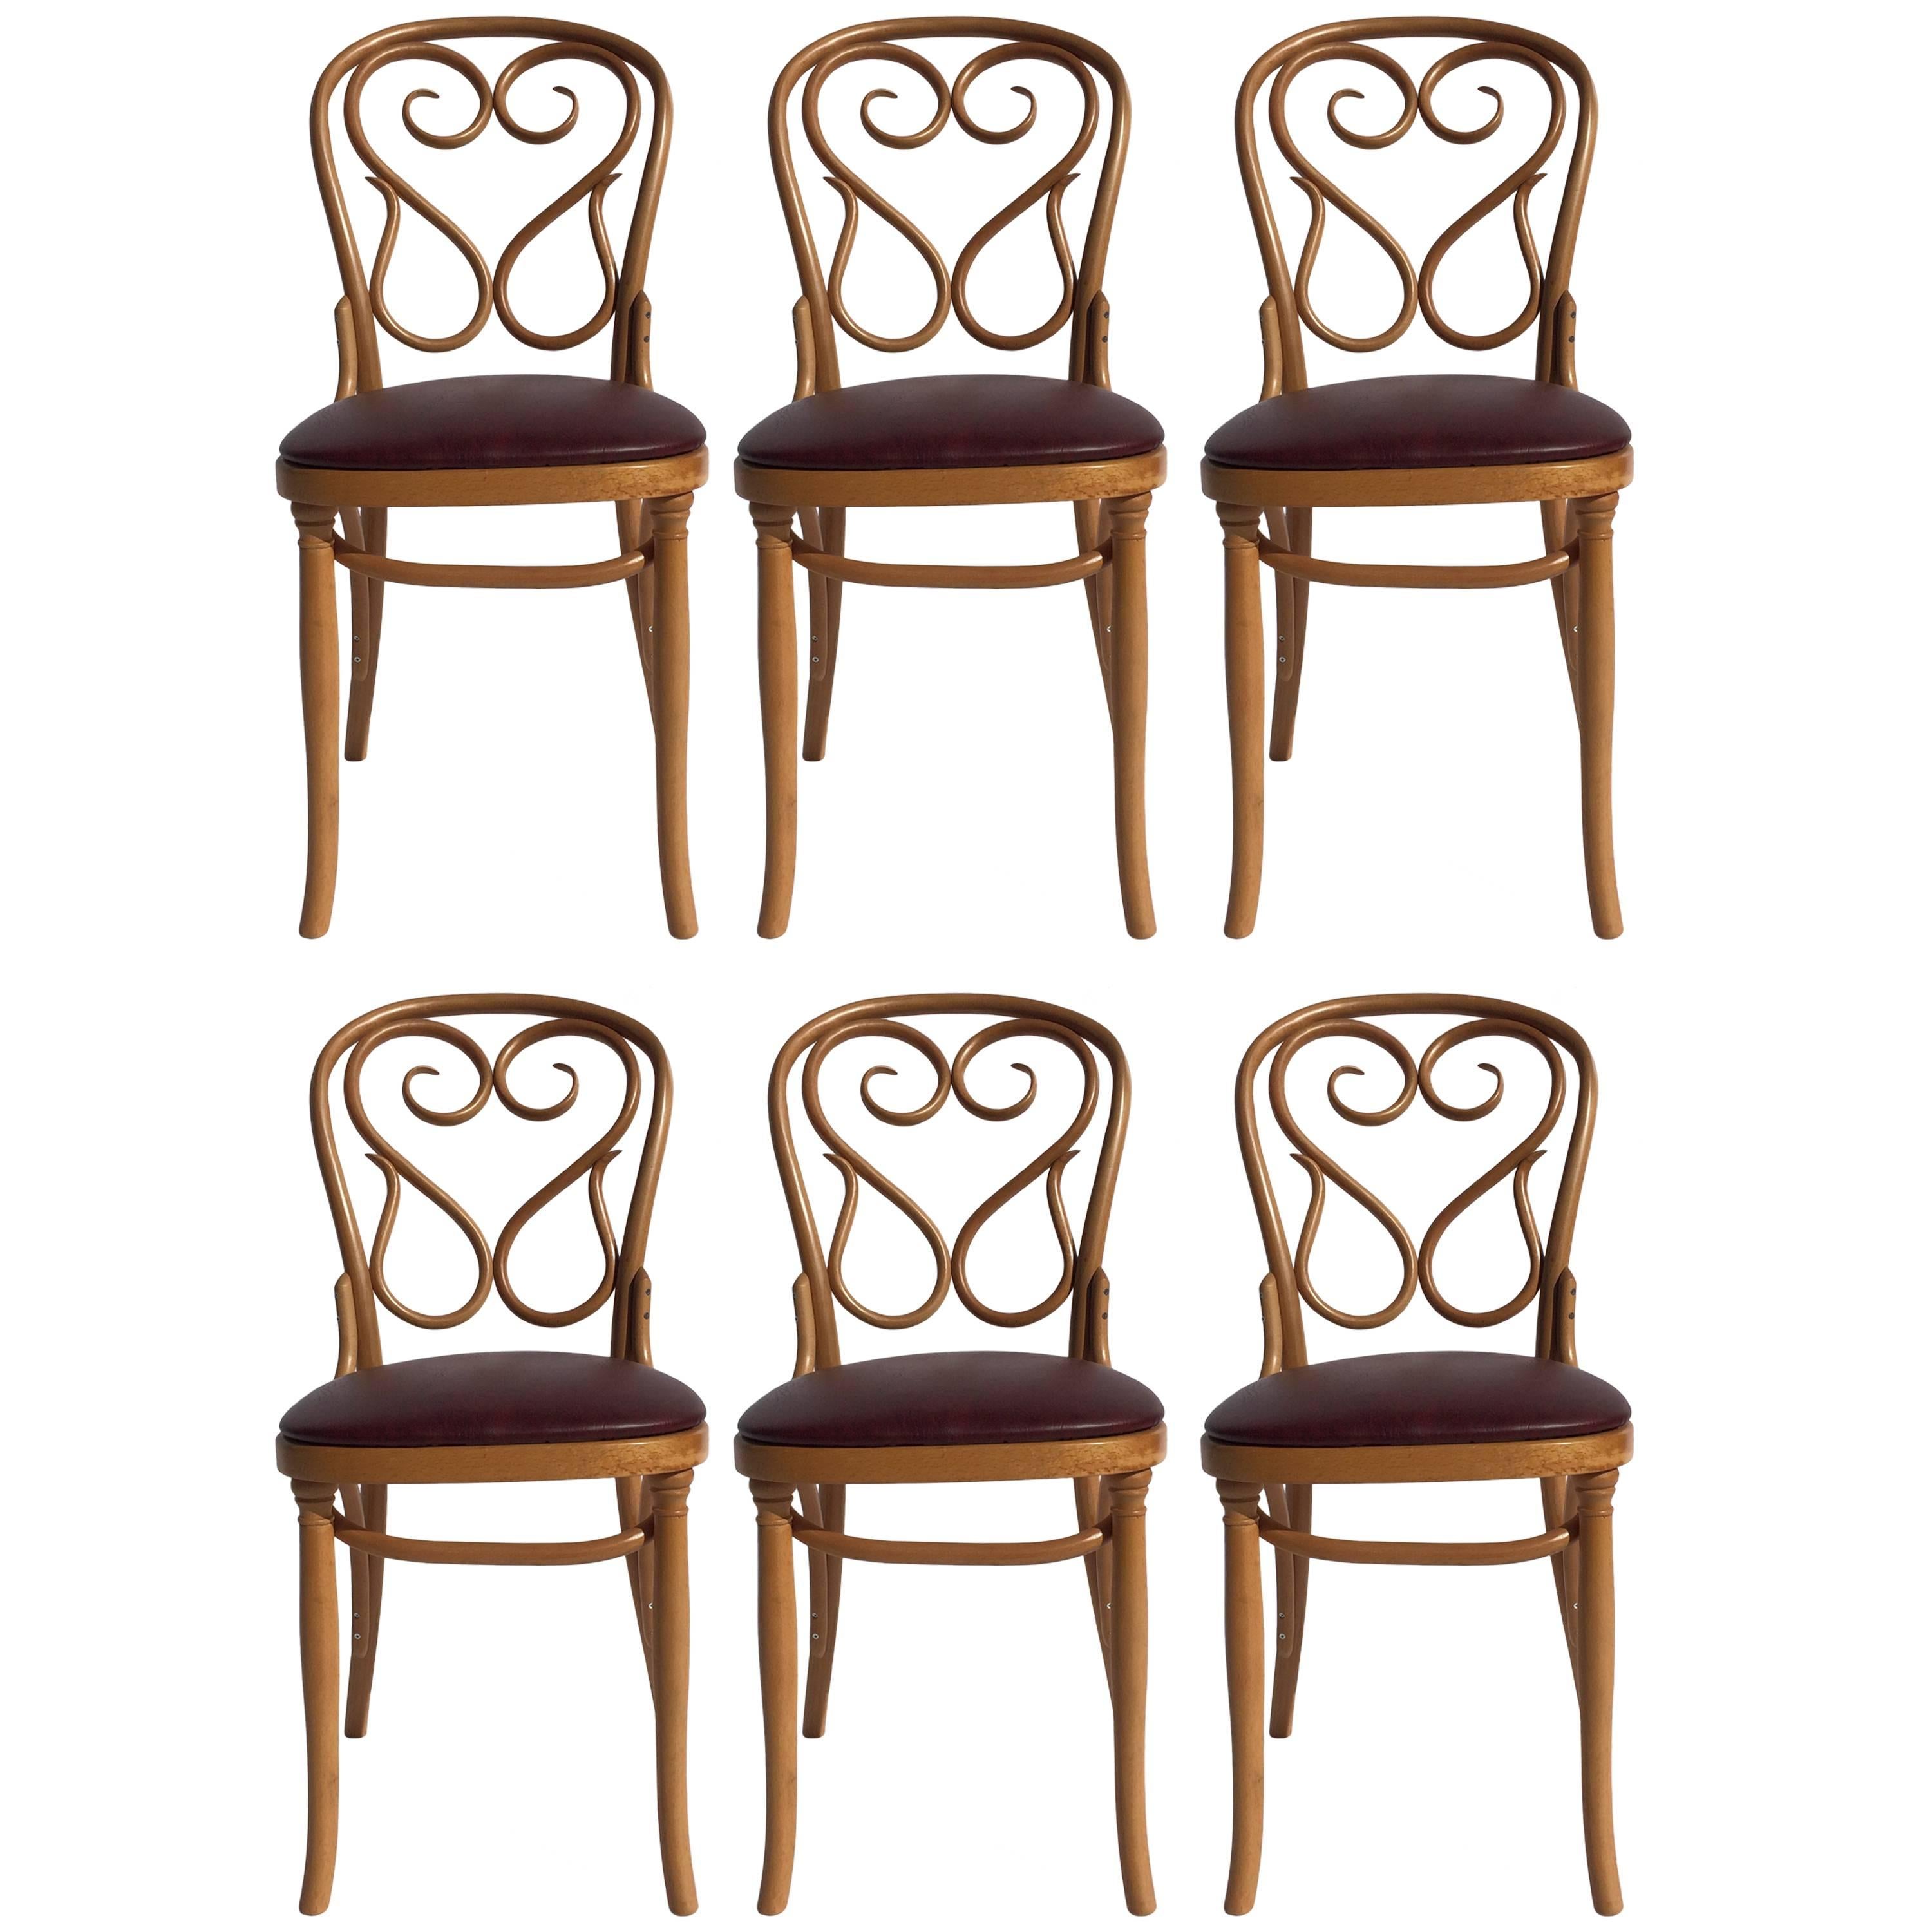 Four Beautiful Thonet Dining Chairs